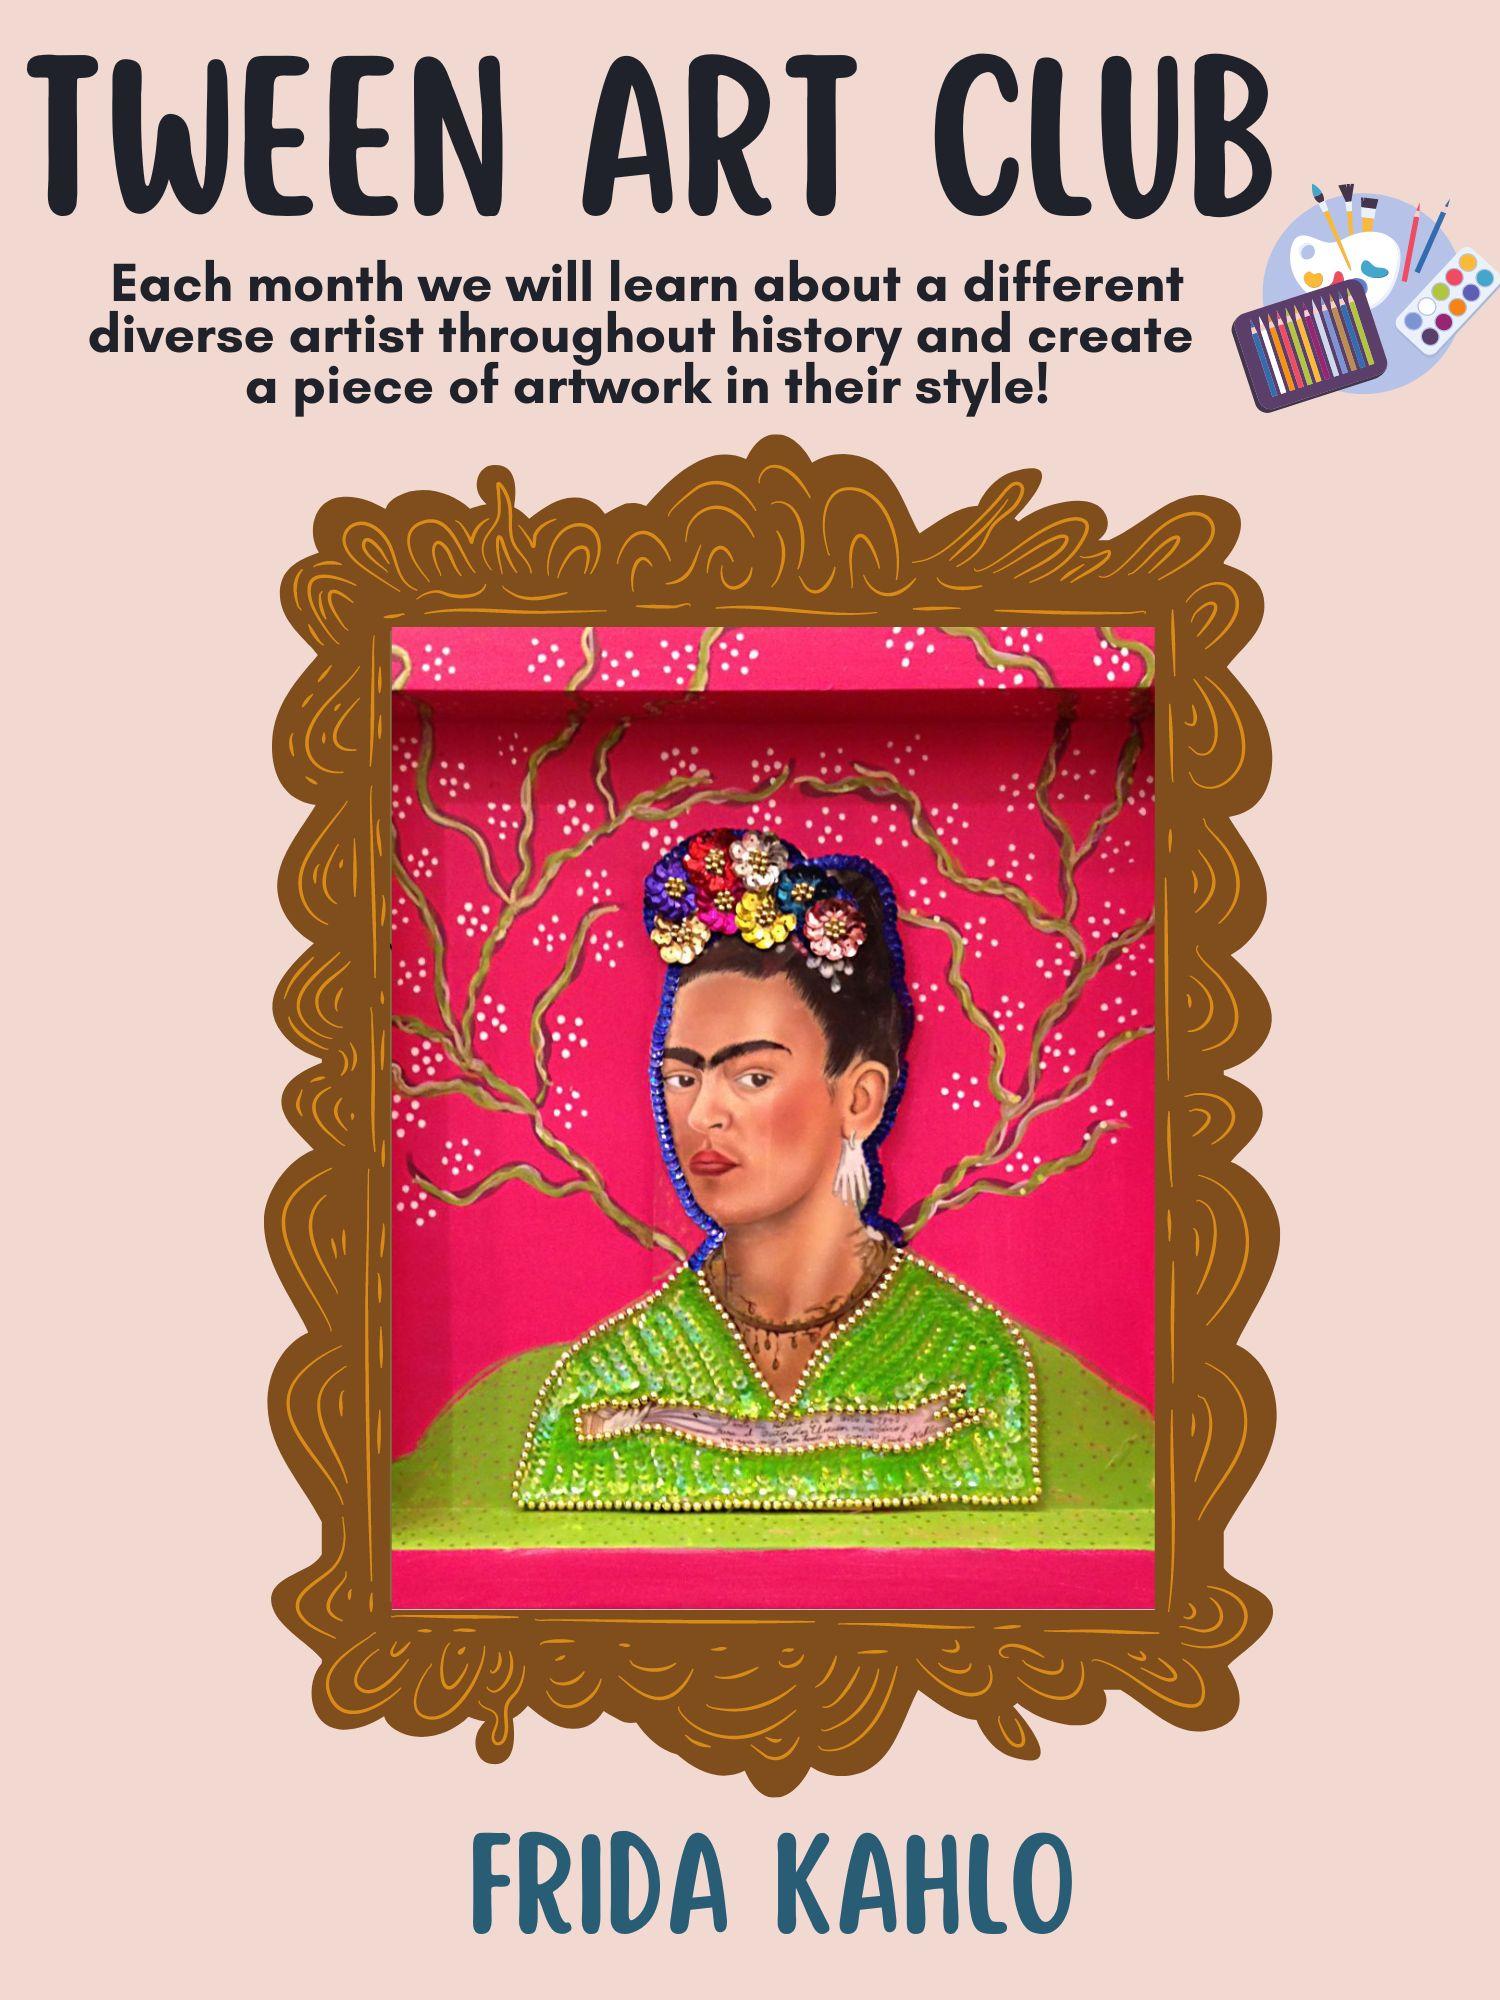 Painted portrait of Frida Kahlo on a pink background. 